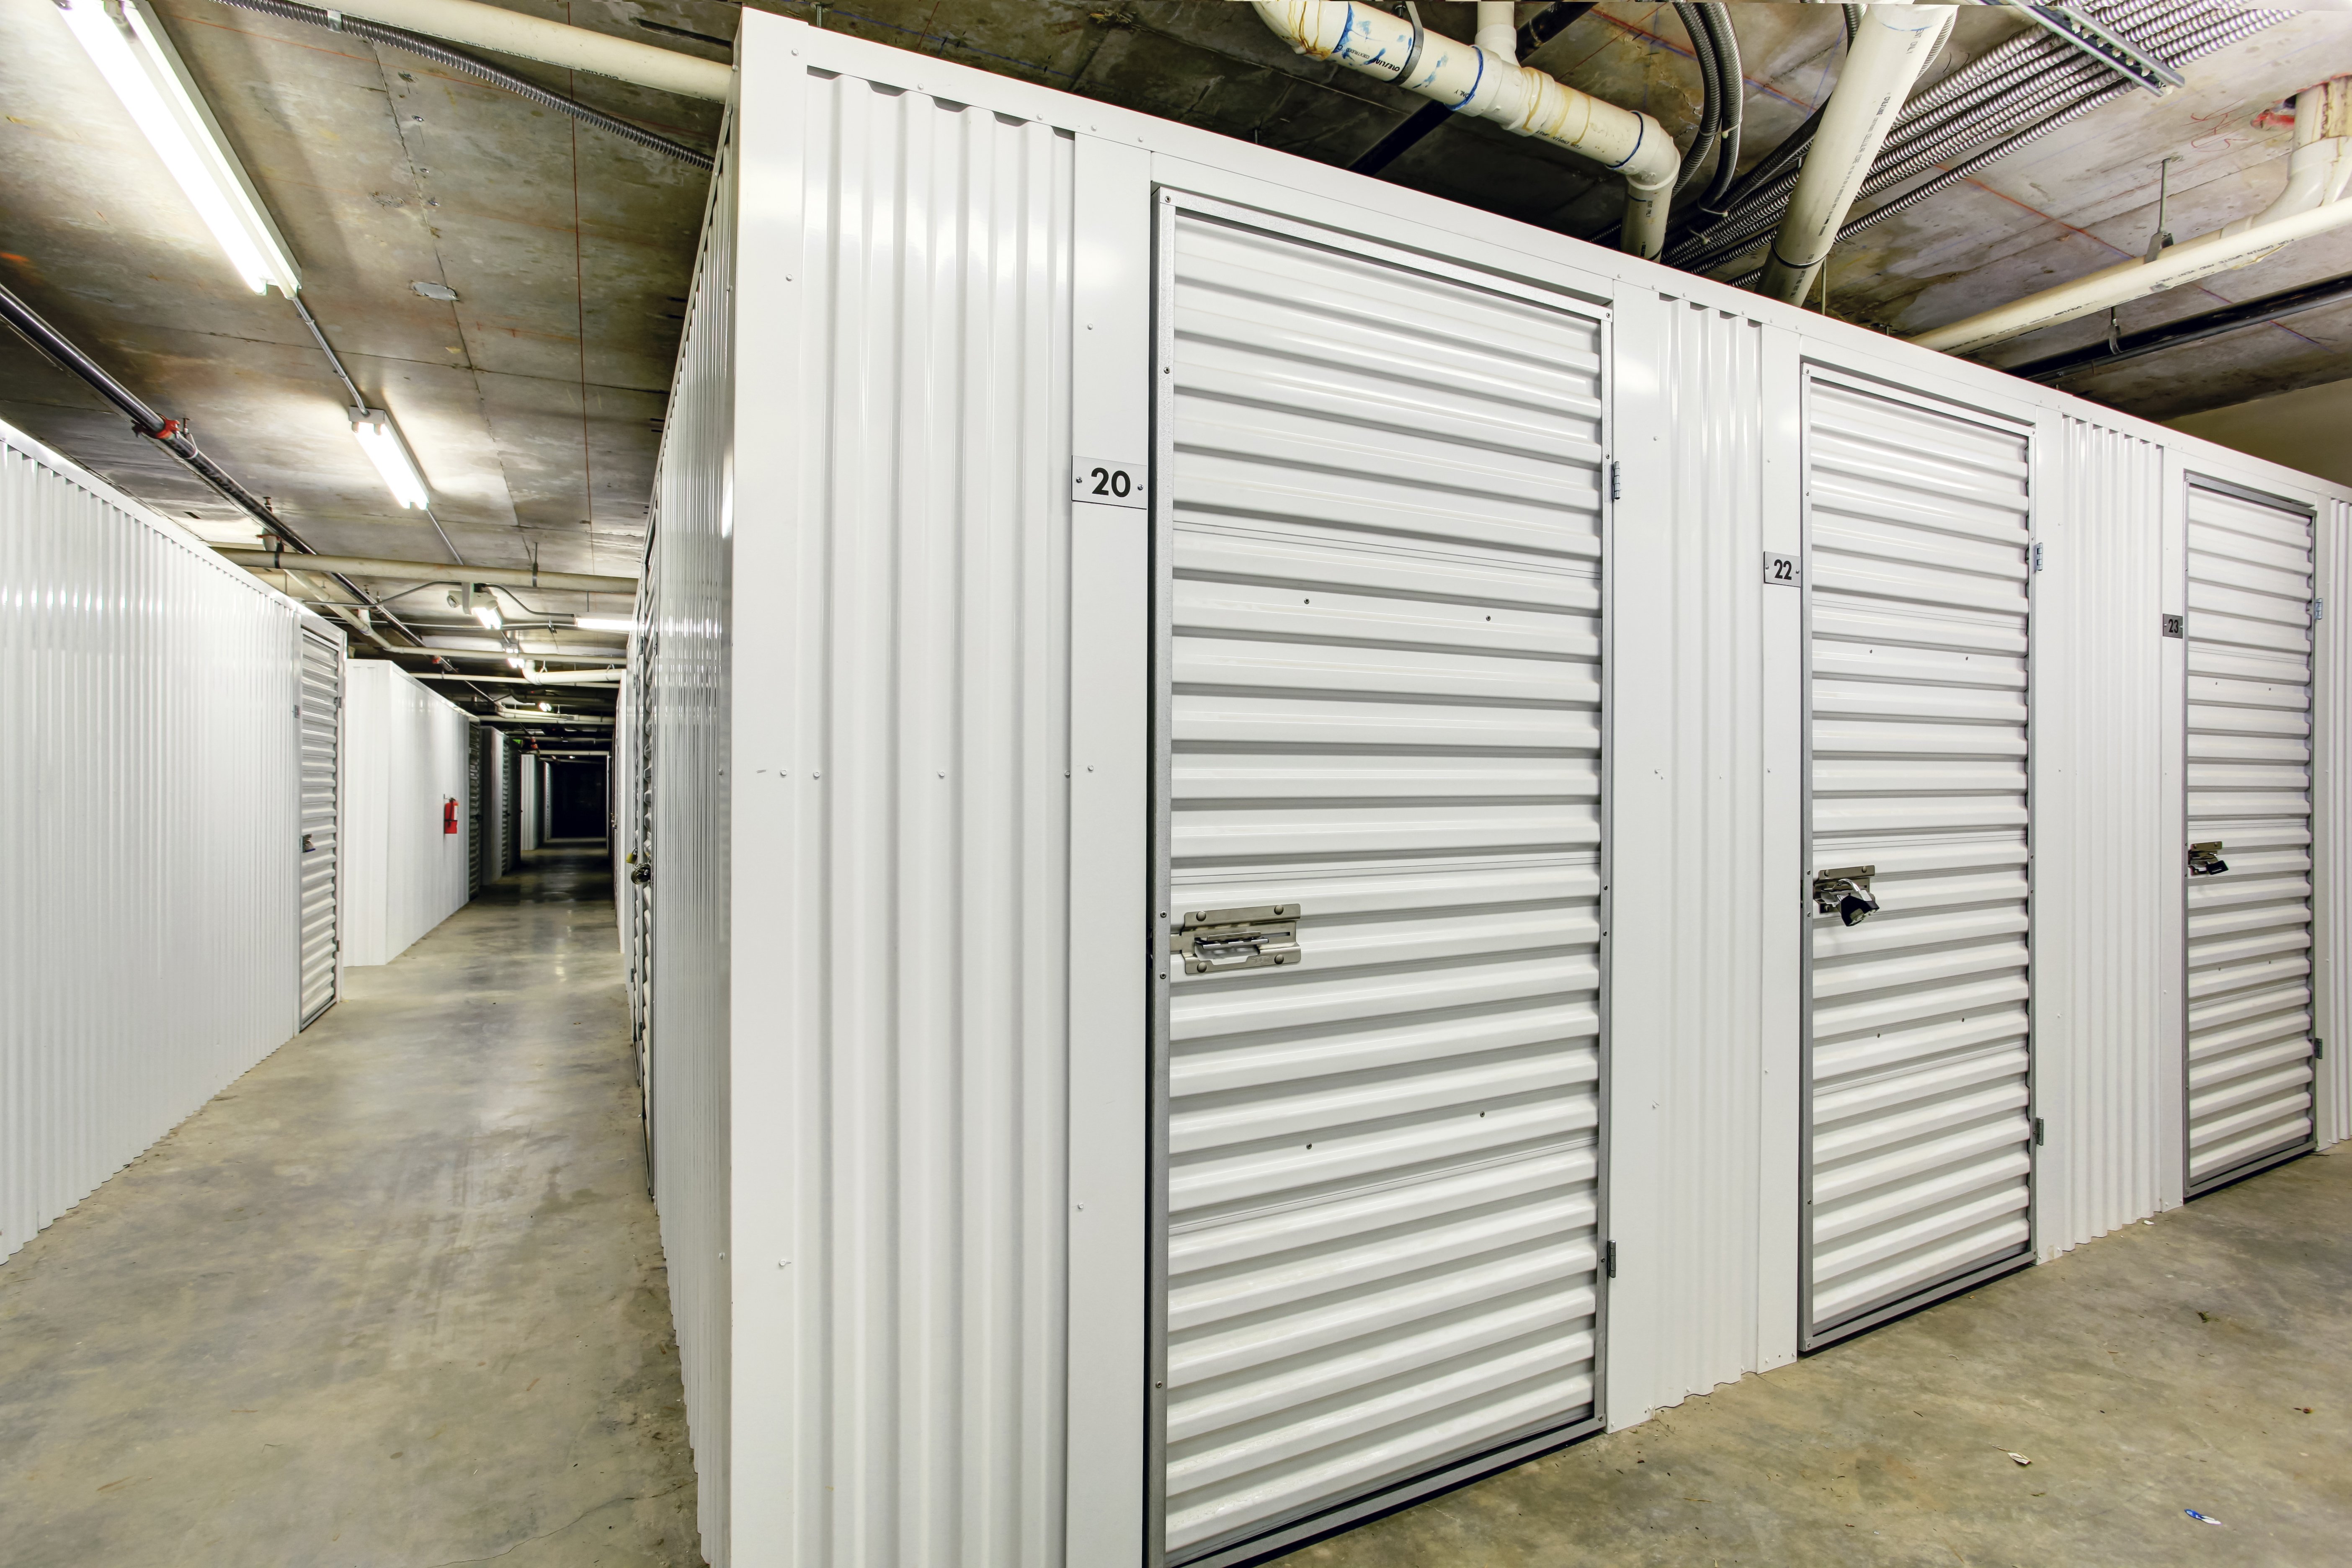 White storage units placed in the basement. | Source: shutterstock